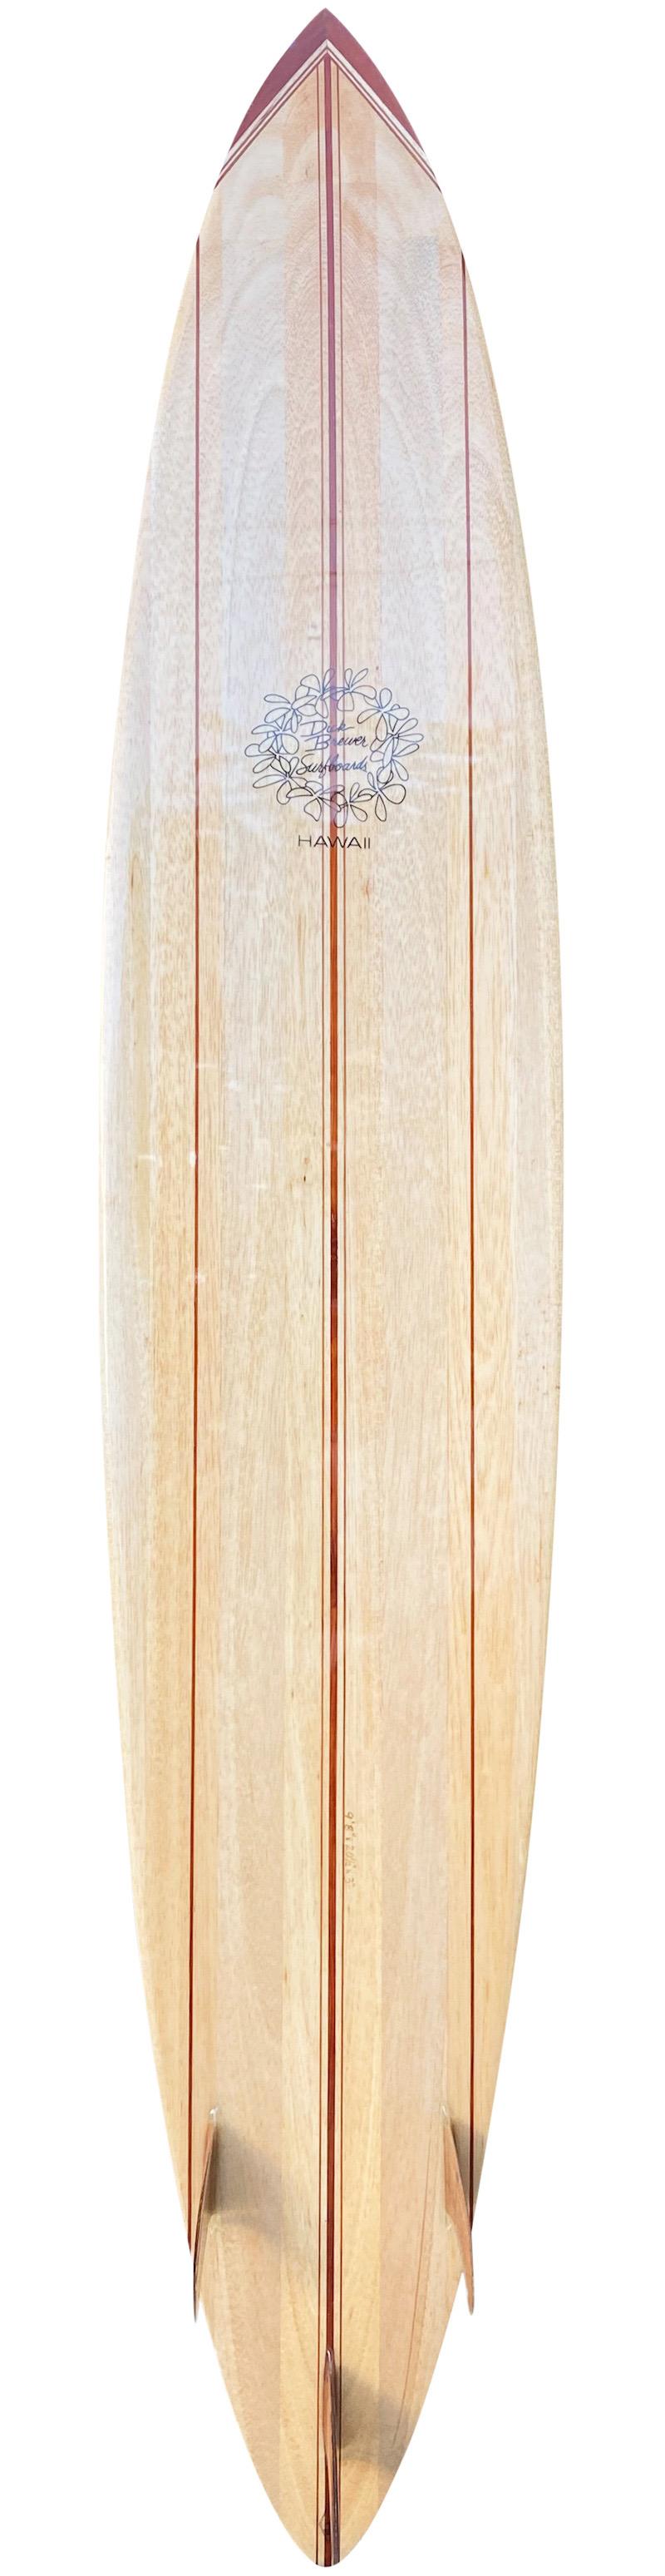 Brewer balsawood surfboard handmade by the late Dick Brewer (1936-2022). Features a 5 stringer shape design with koawood single fin, transparent Brewer plumeria logo, and 5 piece nose block. A gorgeous big wave surfboard shaped by the revered